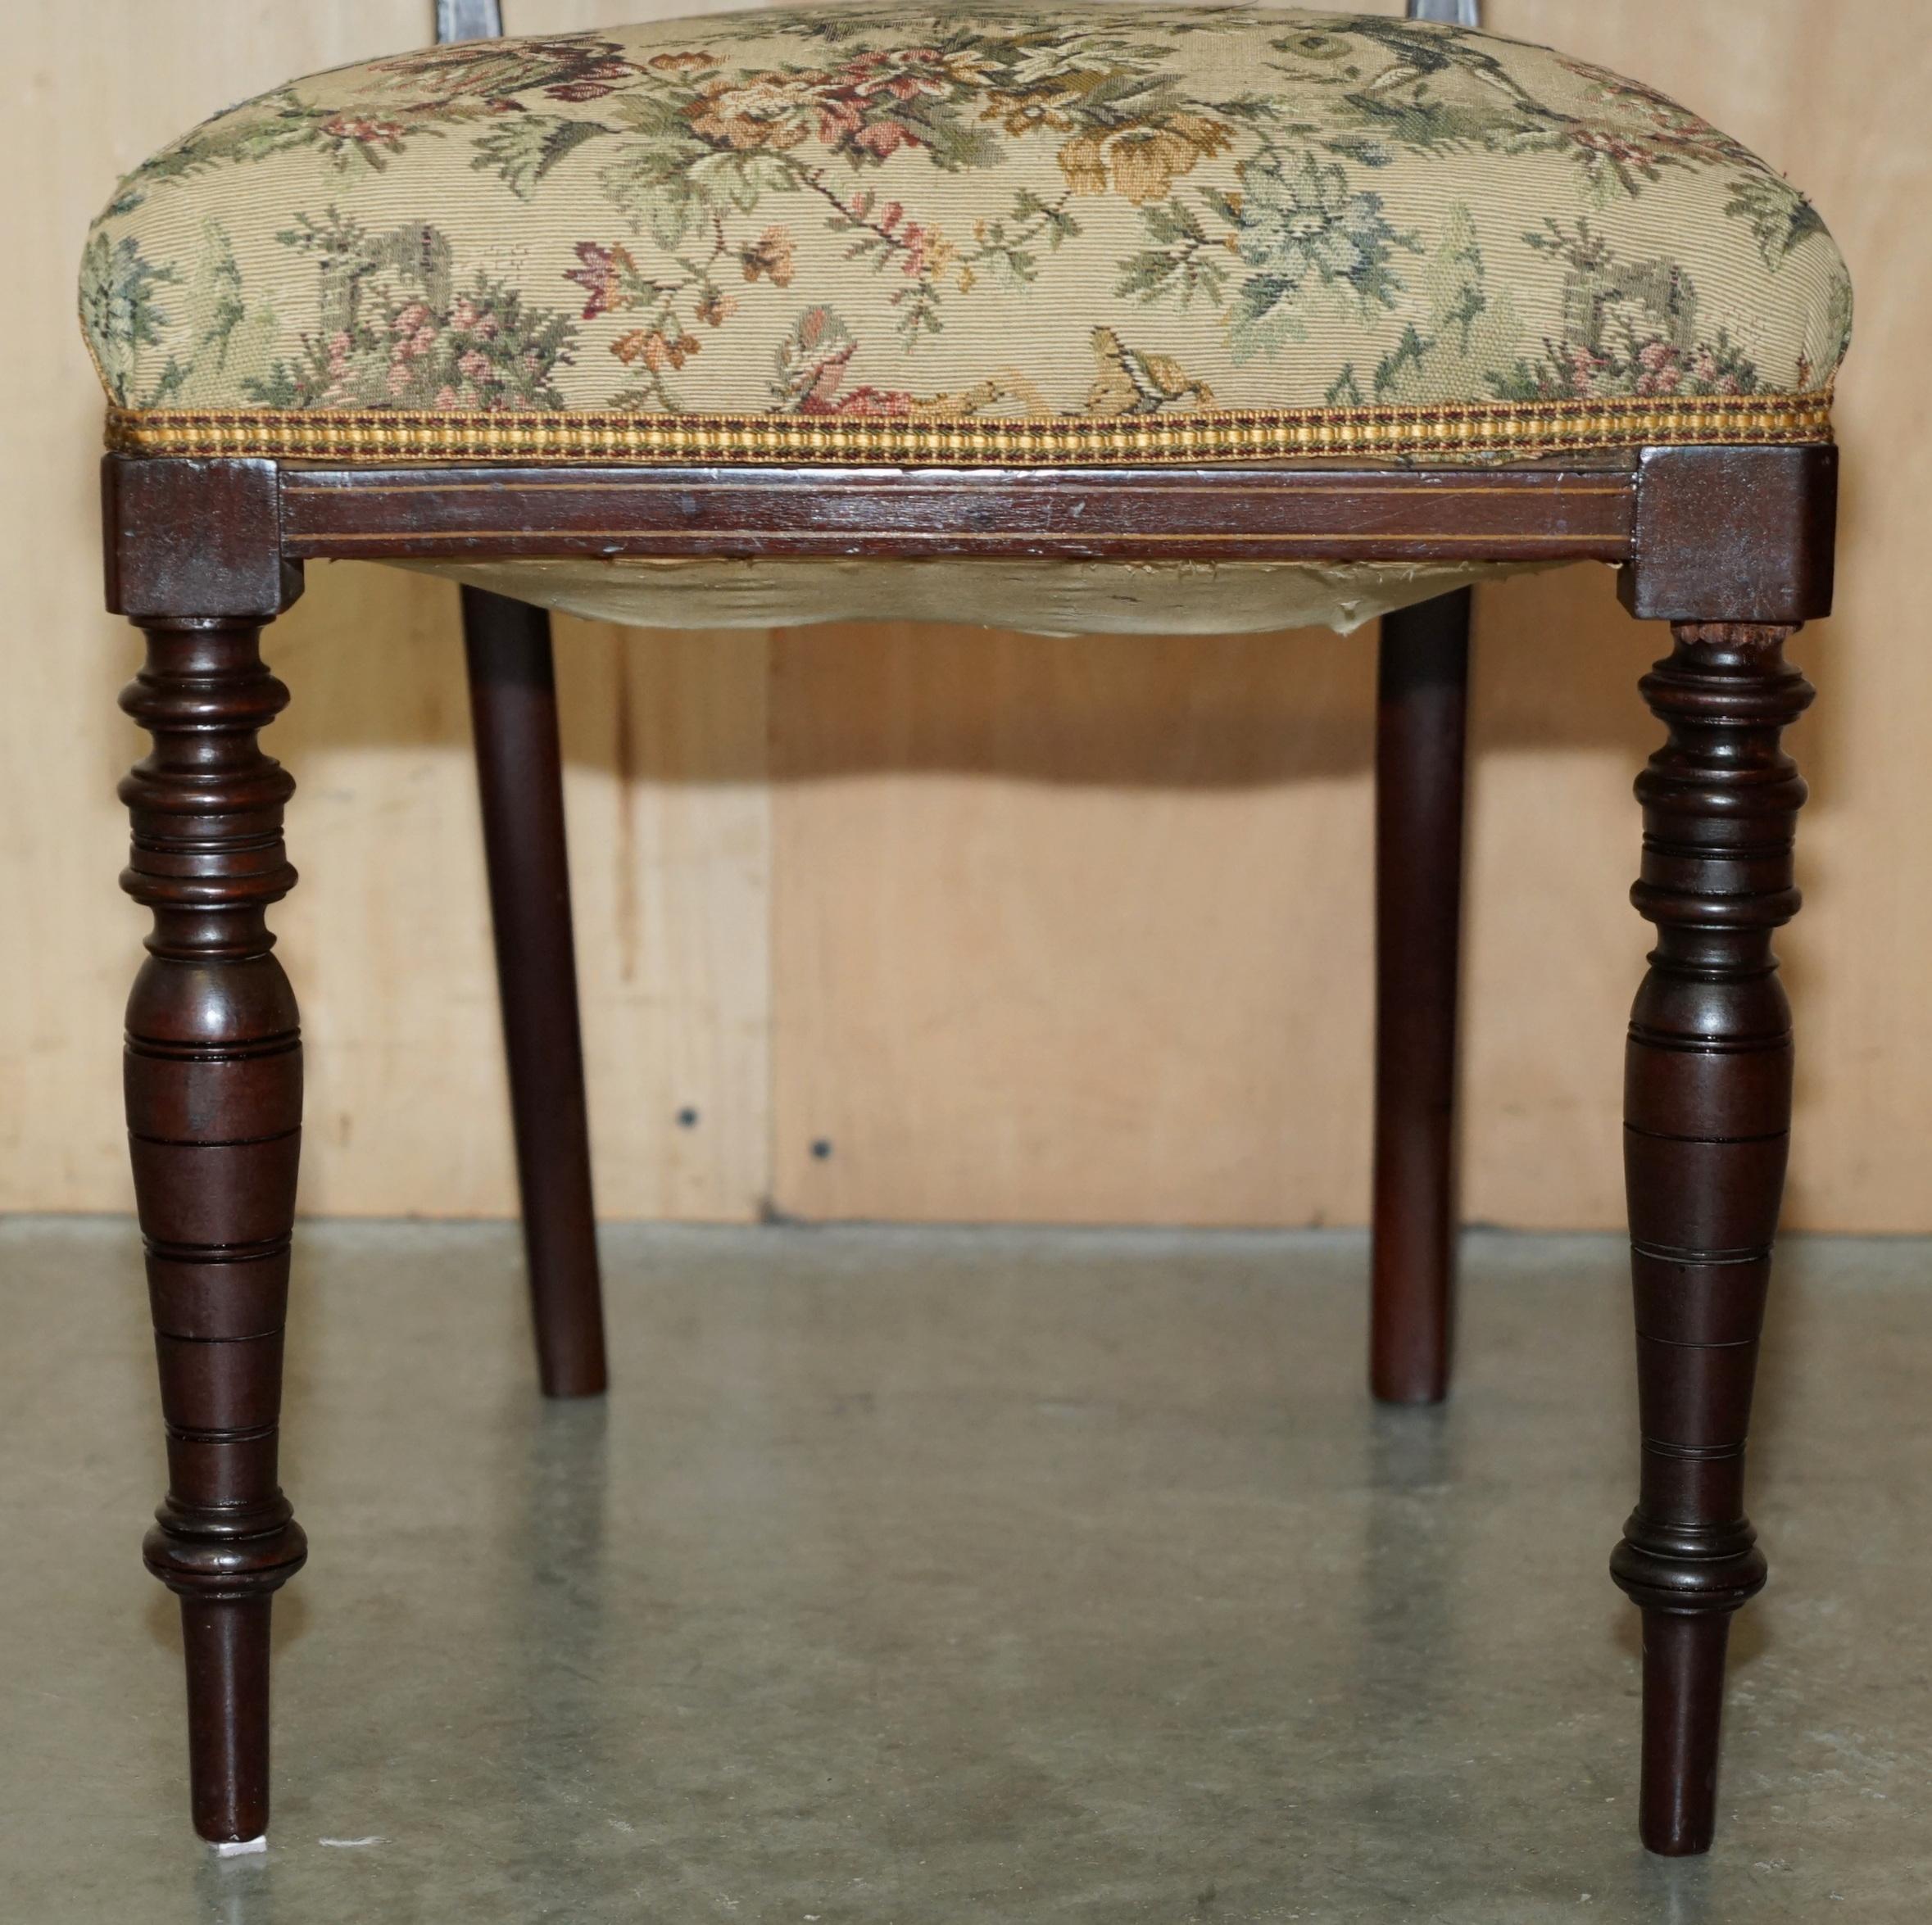 PAiR OF ANTIQUE VICTORIAN HARDWOOD SALON CHAIRS WITH STUNNING INLAID BACK PANELS For Sale 2